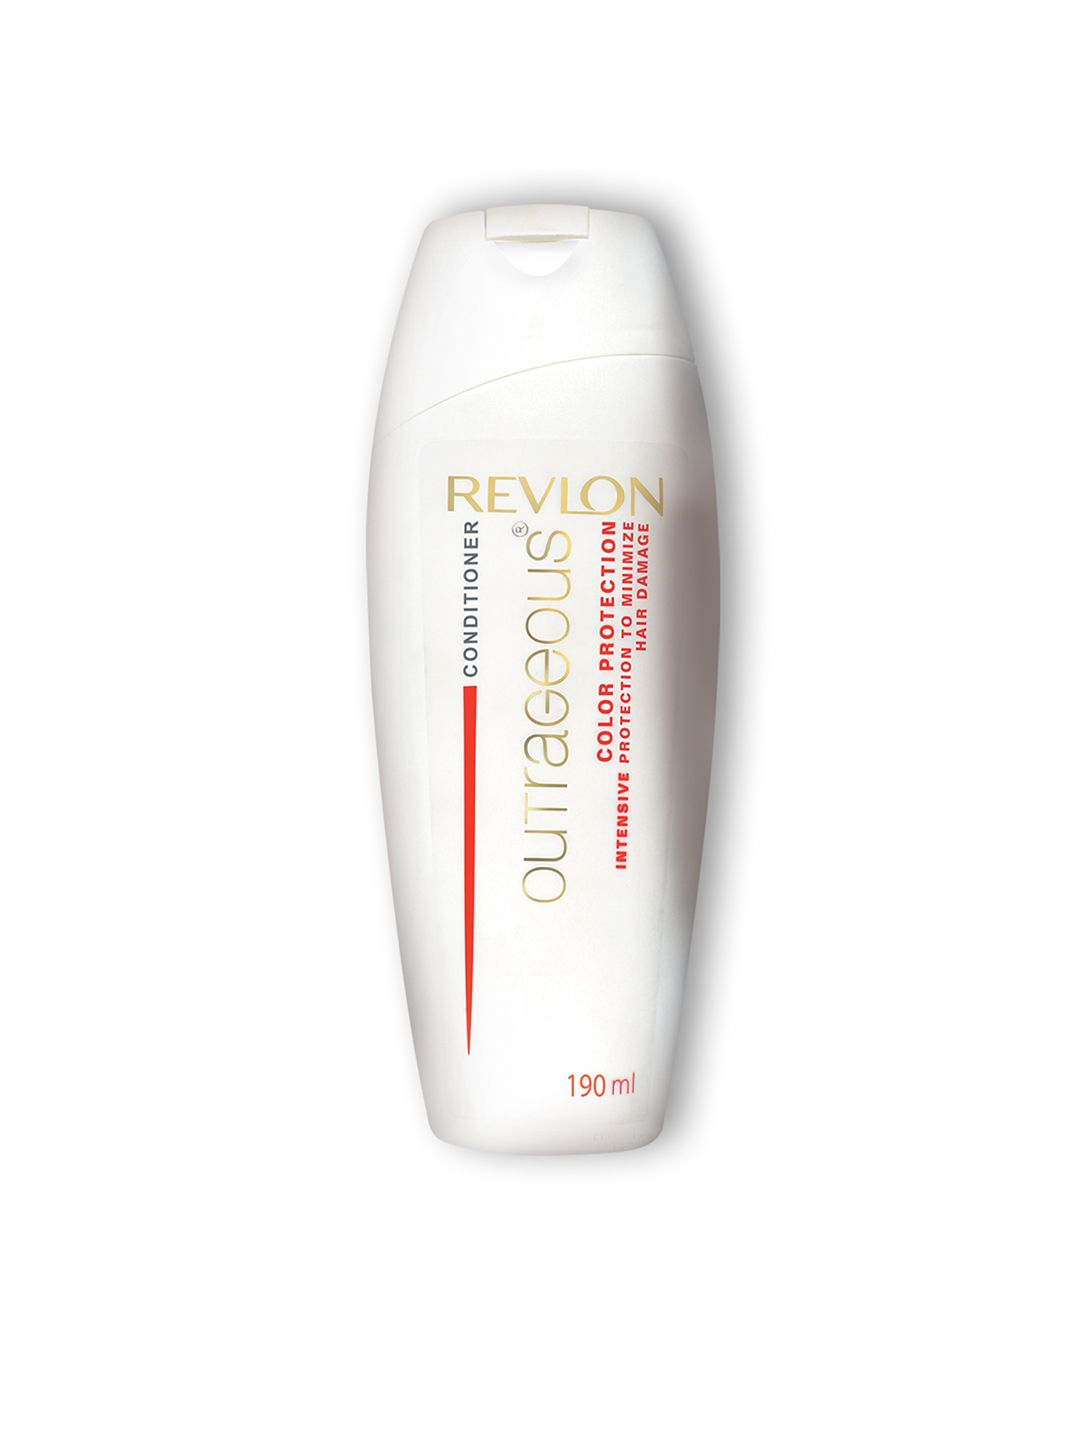 Revlon Outrageous Color Protection Hair Conditioner 190 ml Price in India